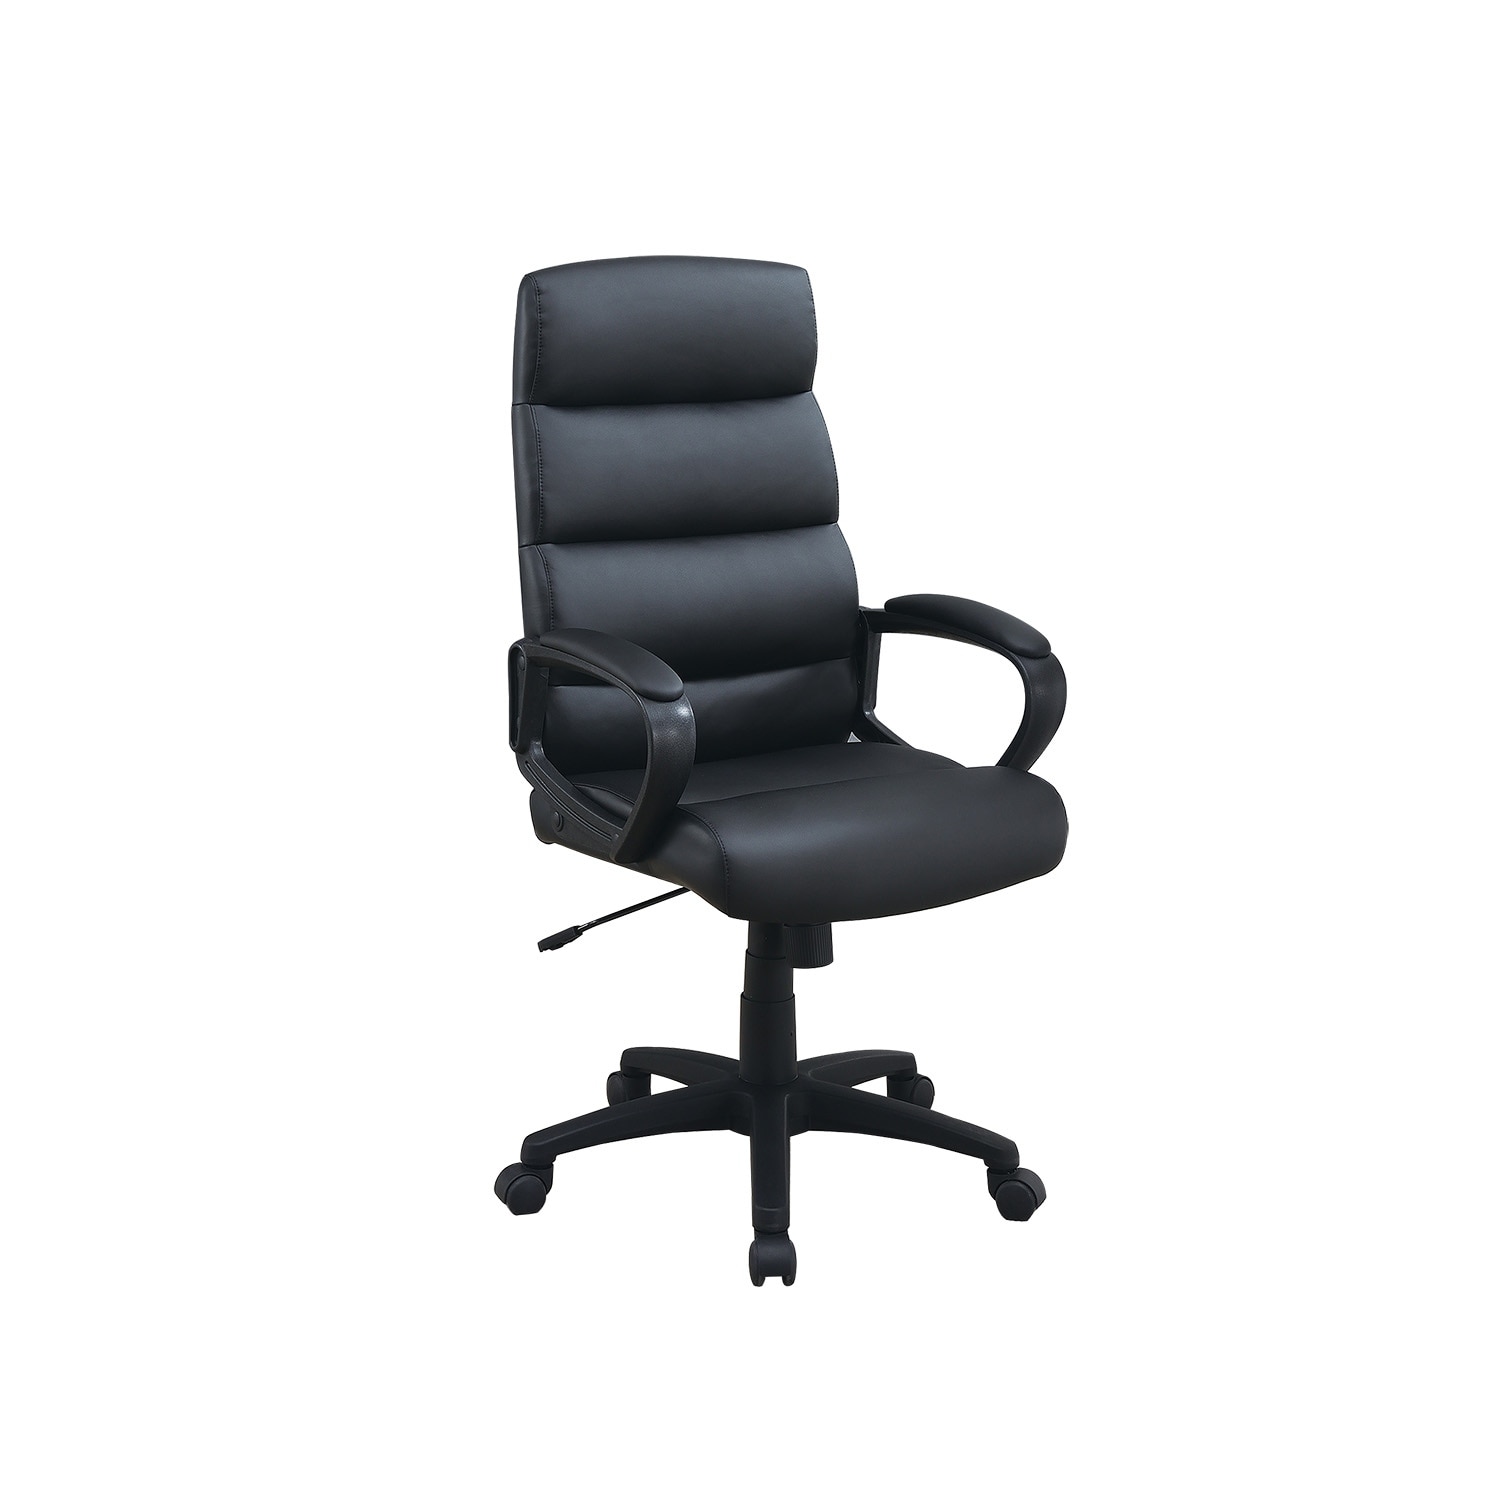 https://ak1.ostkcdn.com/images/products/is/images/direct/0c4d3e50768ee400ab832610f9b7cea80a2f3b28/Executive-Office-Desk-Chair-High-Back-Adjustable-Height-Rolling-Task-Chair%2C-PU-Leather-Home-Office-Chairs-with-Lumbar-Support.jpg